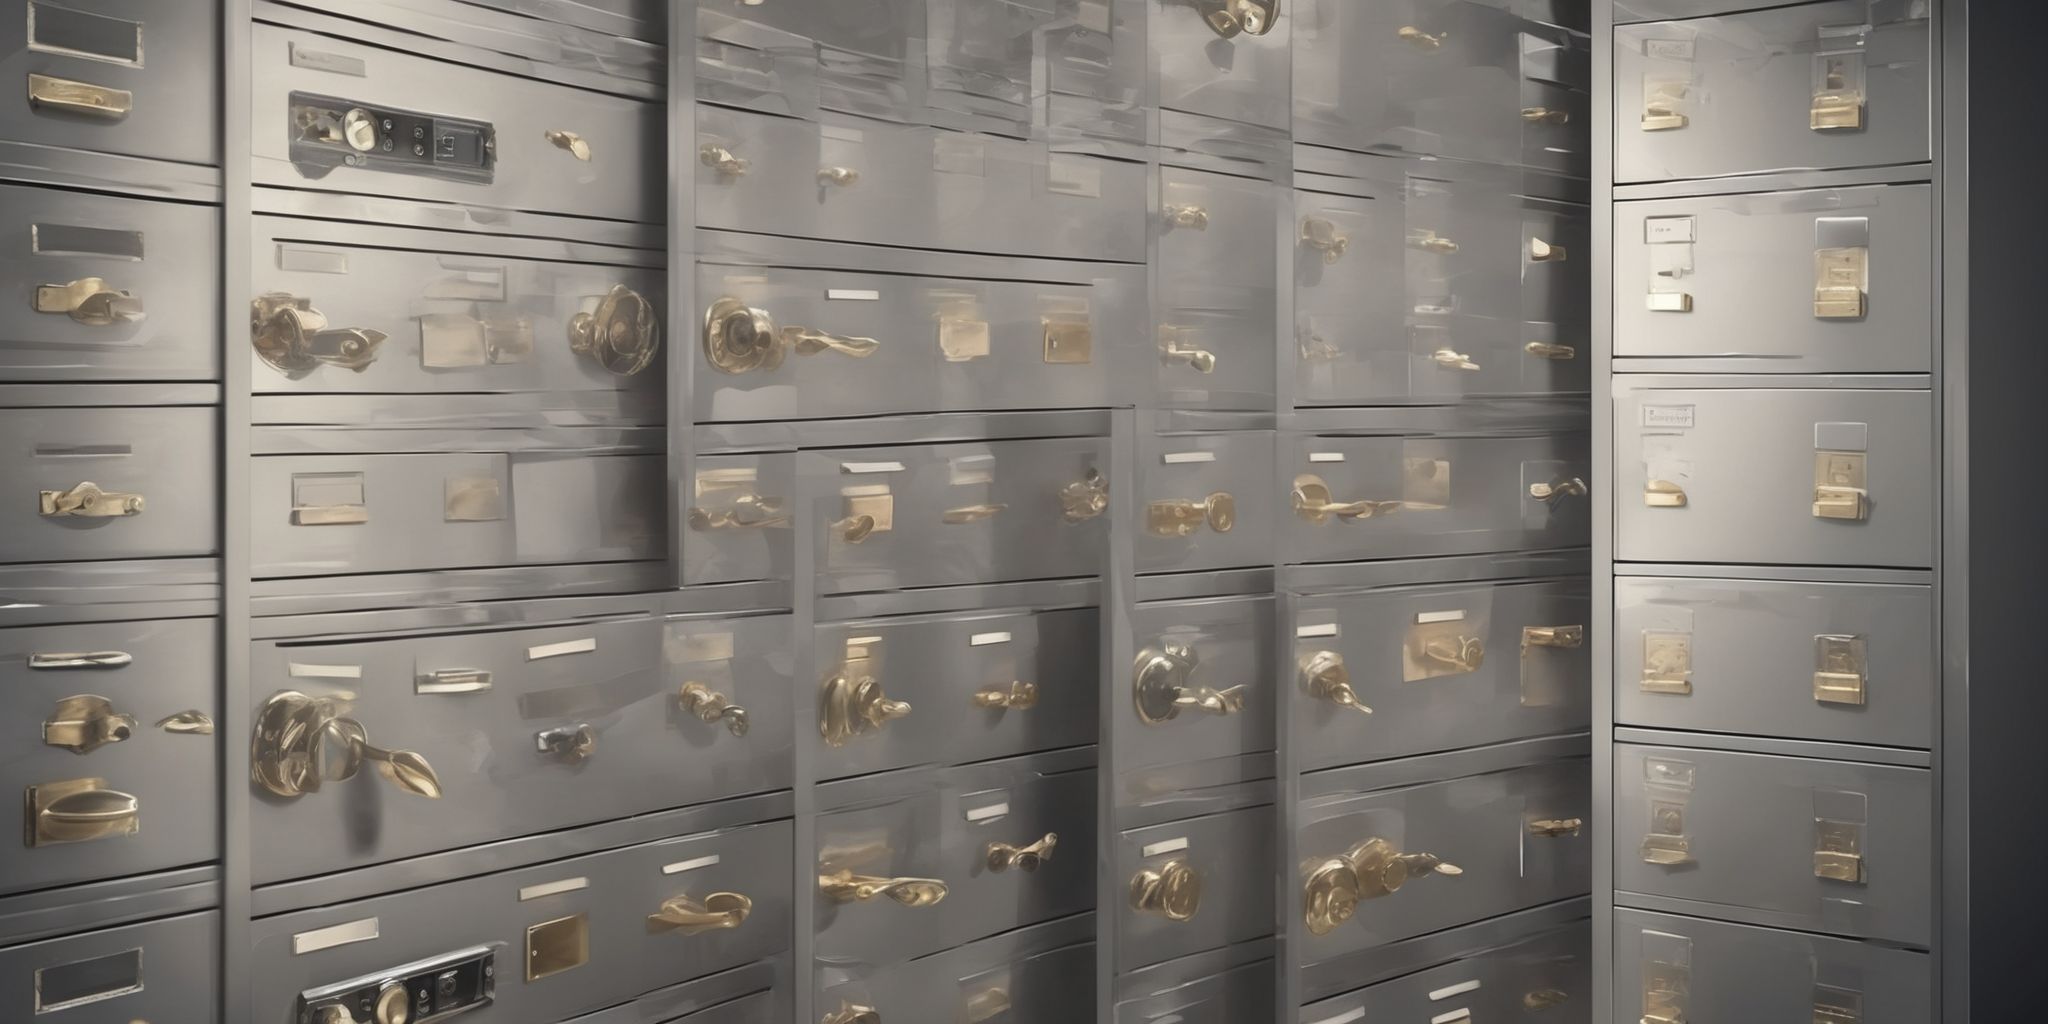 Safe deposit box  in realistic, photographic style